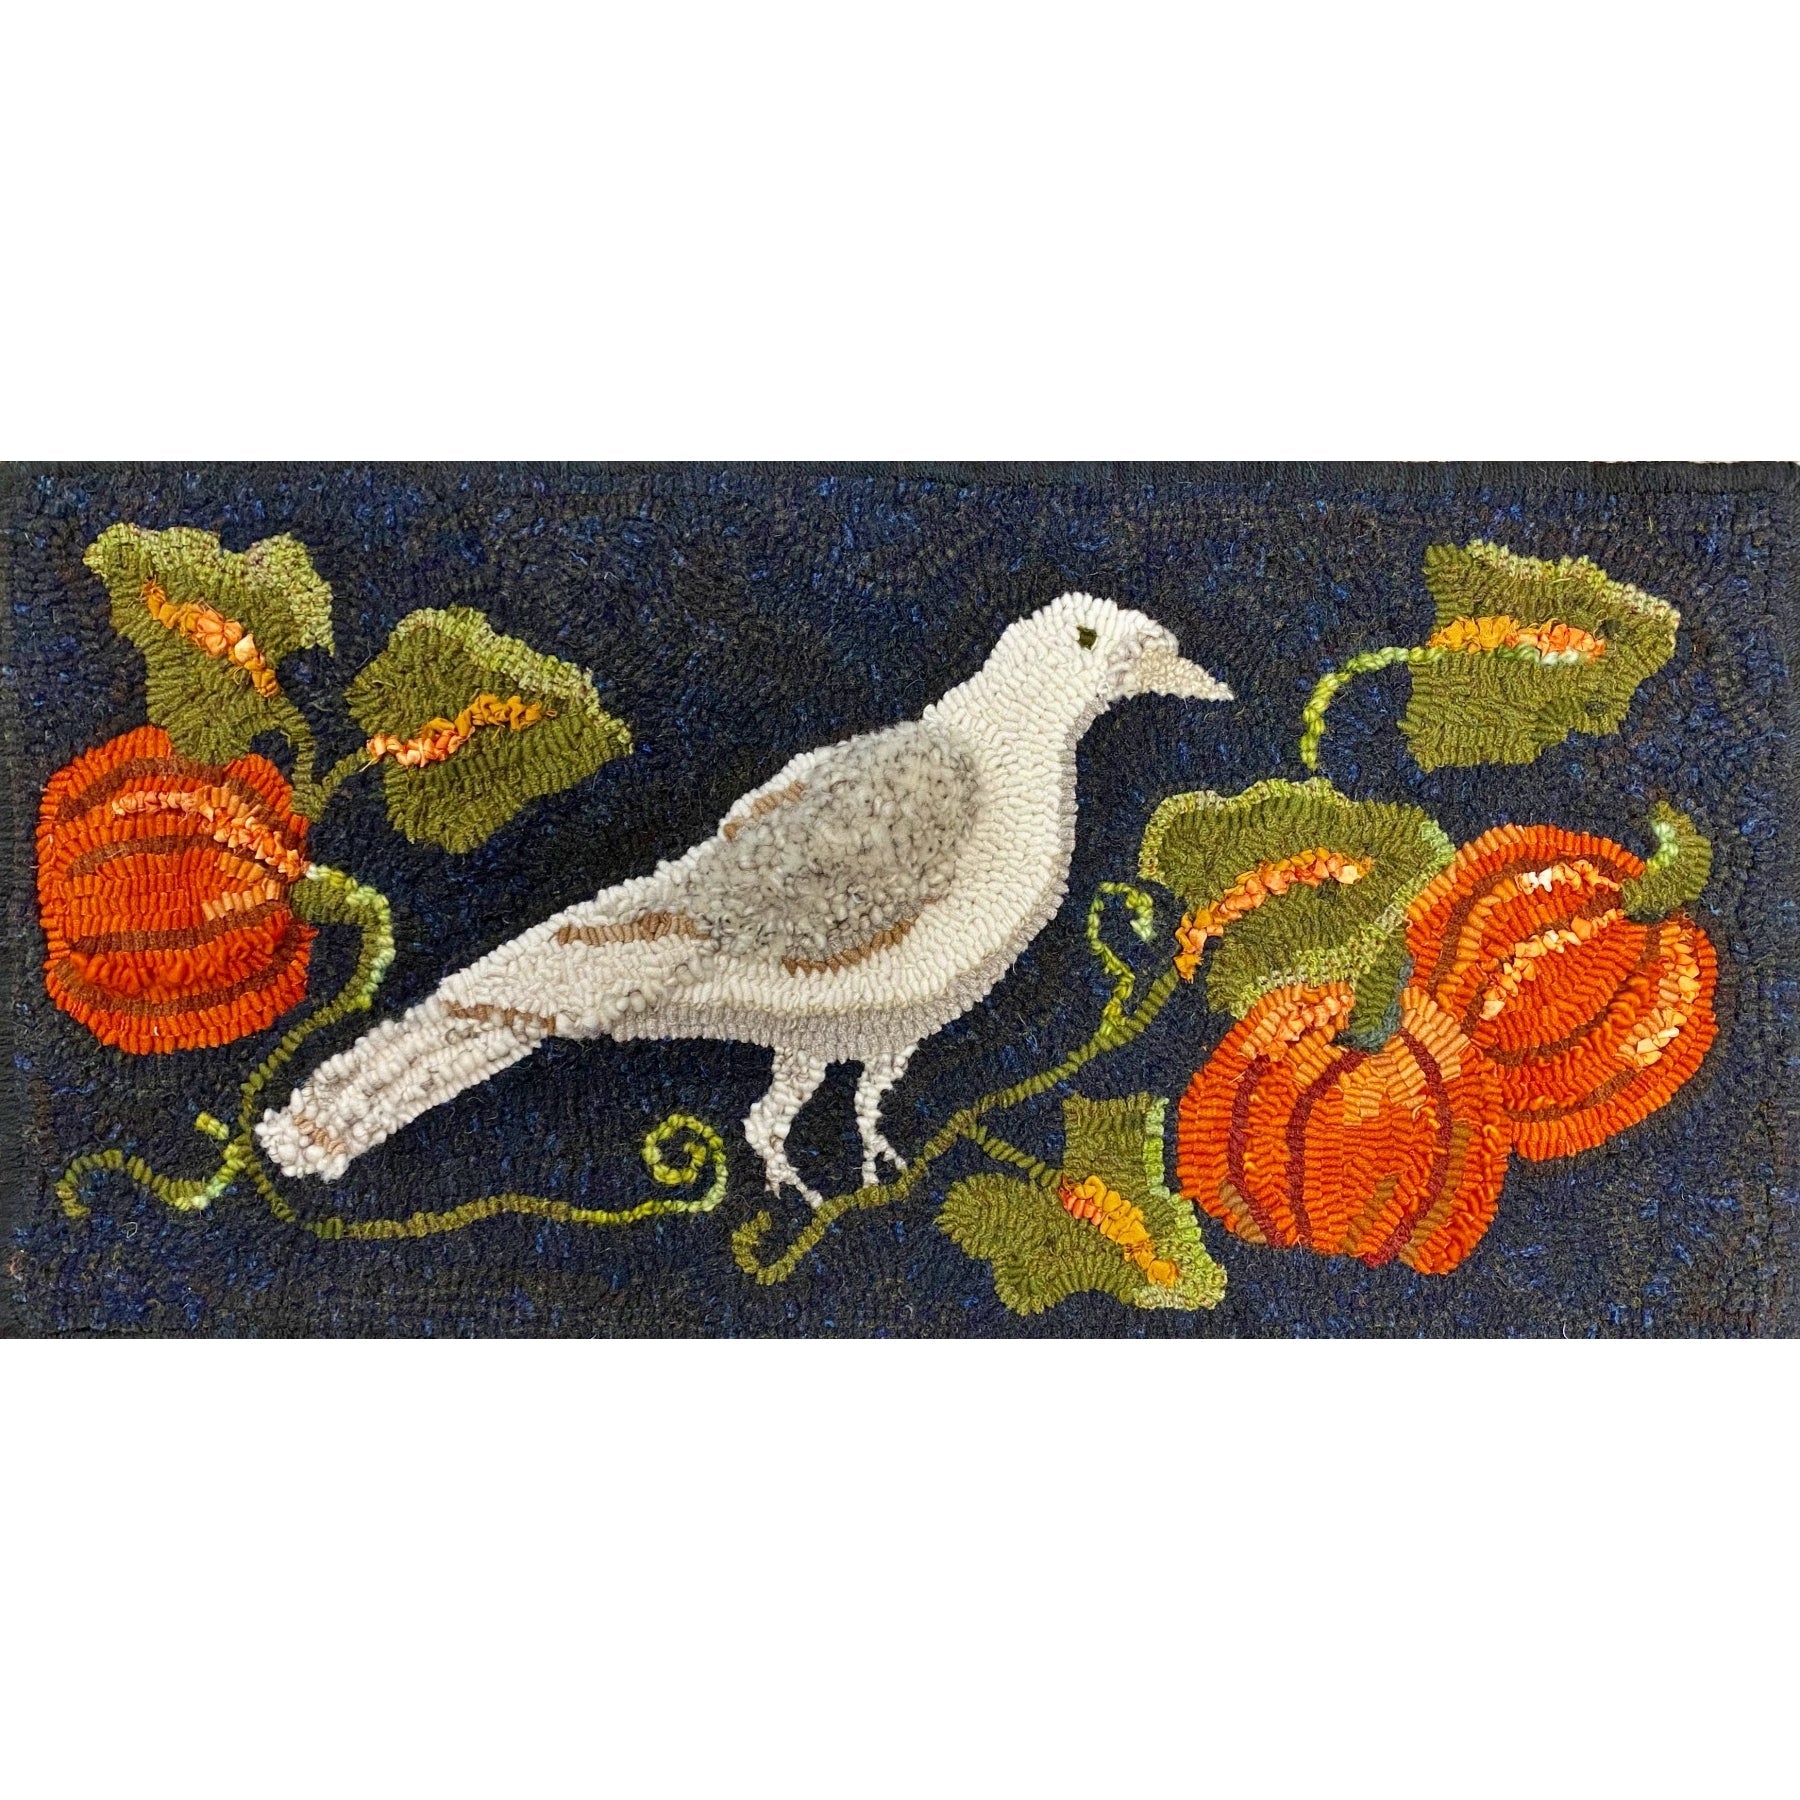 Pumpkin Harvest Small, rug hooked by Linda Powell